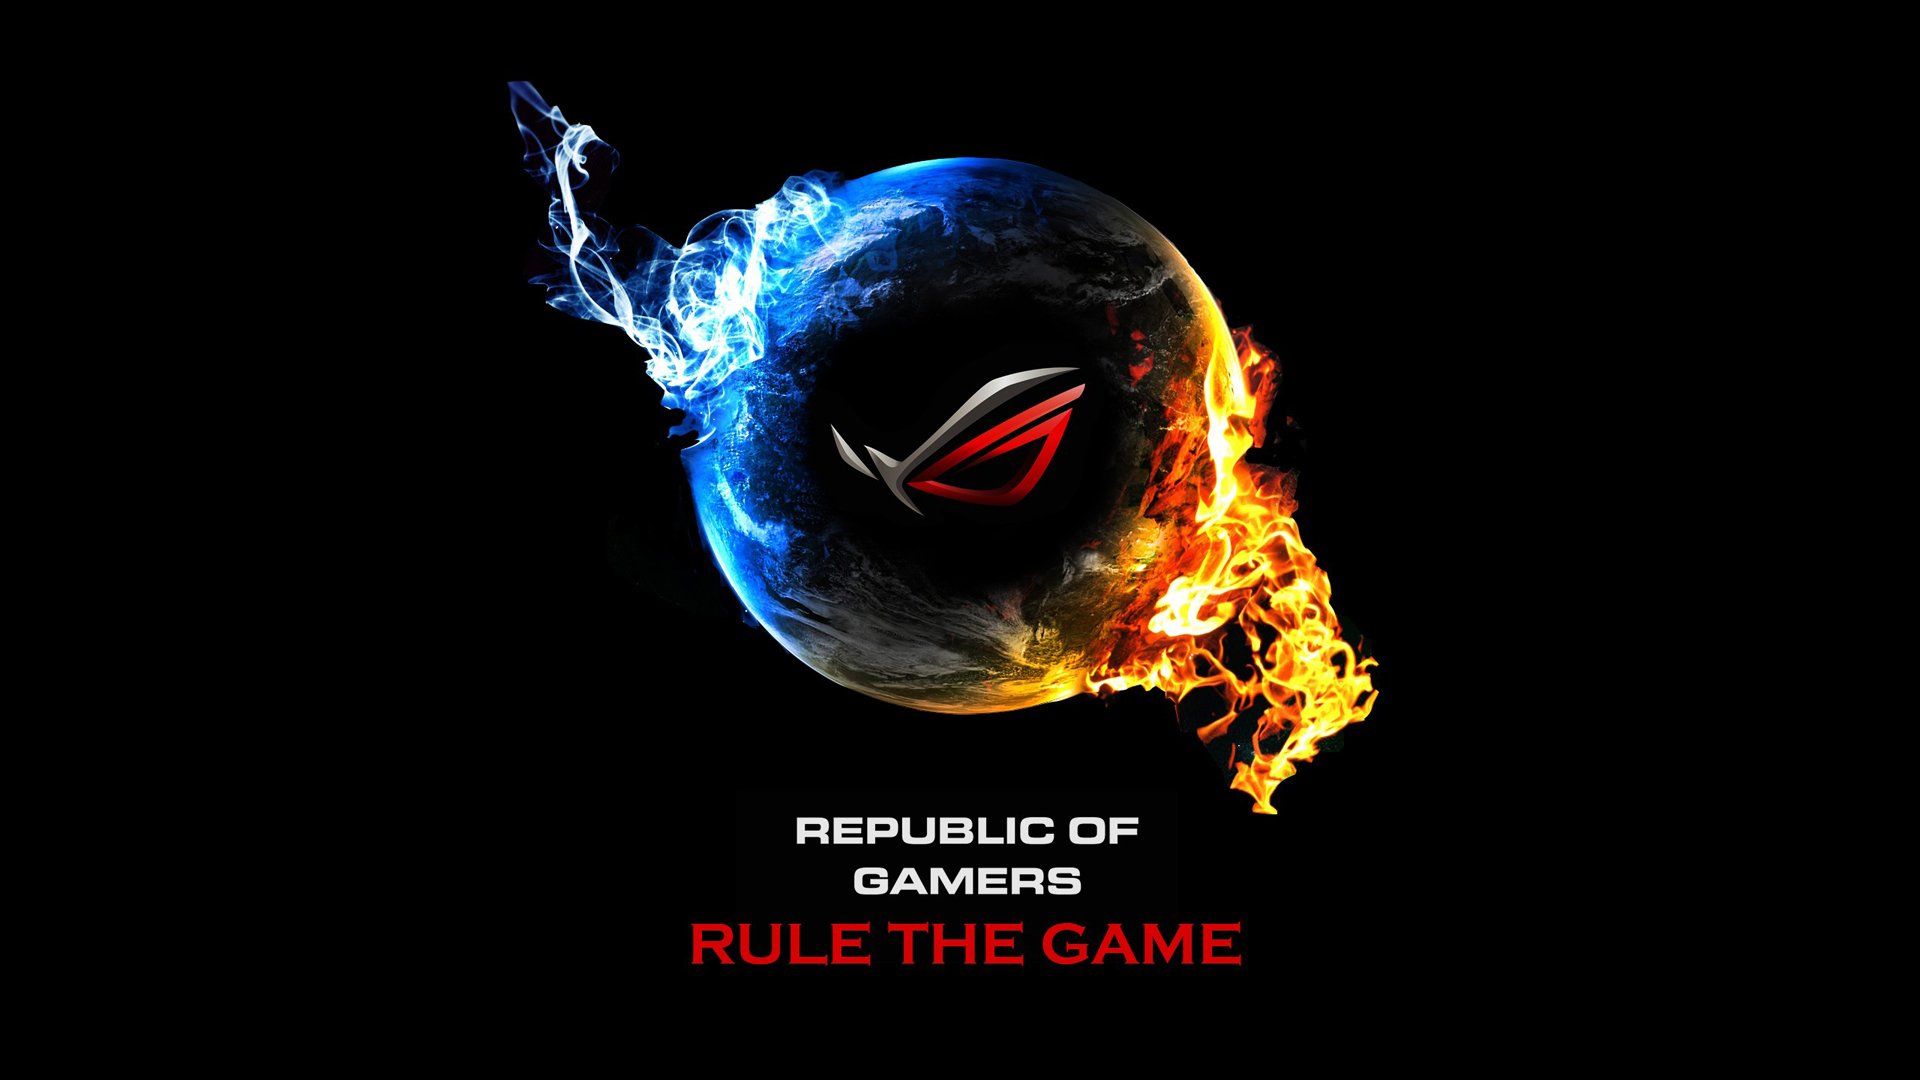 Hd Desktop Wallpaper: Technology, Asus Rog, Republic Of Gamers Download  Free Picture #785274